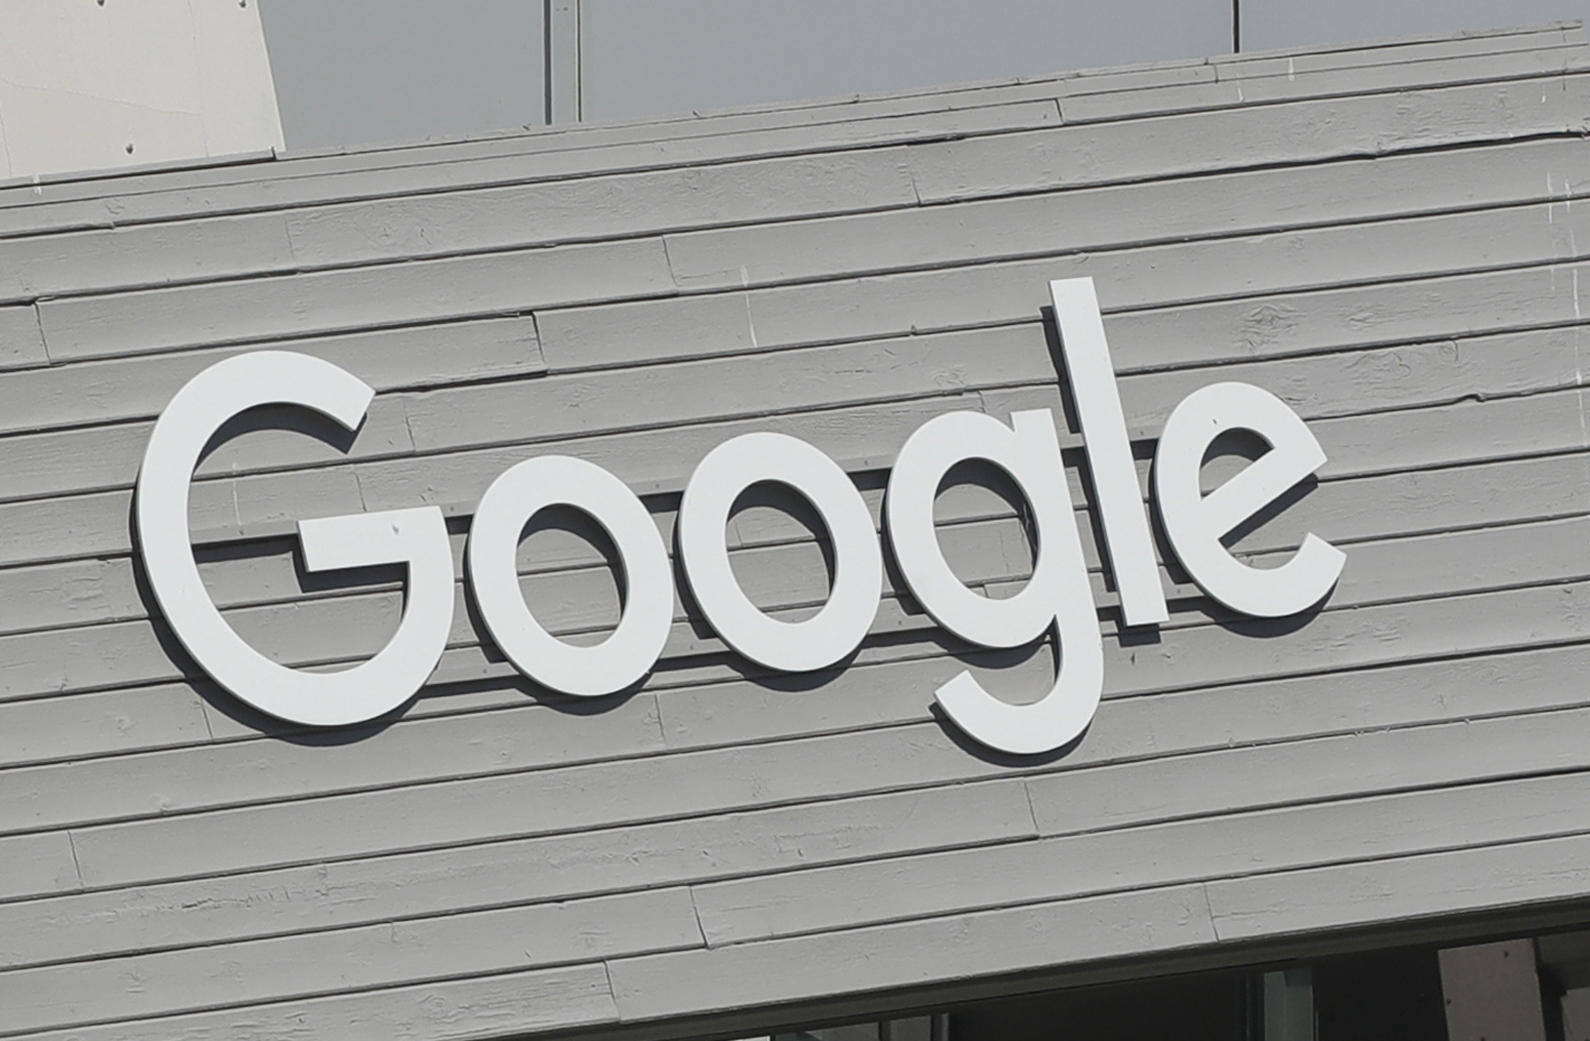 FILE - A Google sign on the is shown on the company campus in Mountain View, Calif., on Sept. 24, 2019. A former Google employee has sued the tech giant saying it engages in a “pattern and practice” of racial discrimination against its Black workers, steering them into lower-level and lower-paid jobs and subjecting them to a hostile work environment if they speak out. (AP Photo/Jeff Chiu, File)